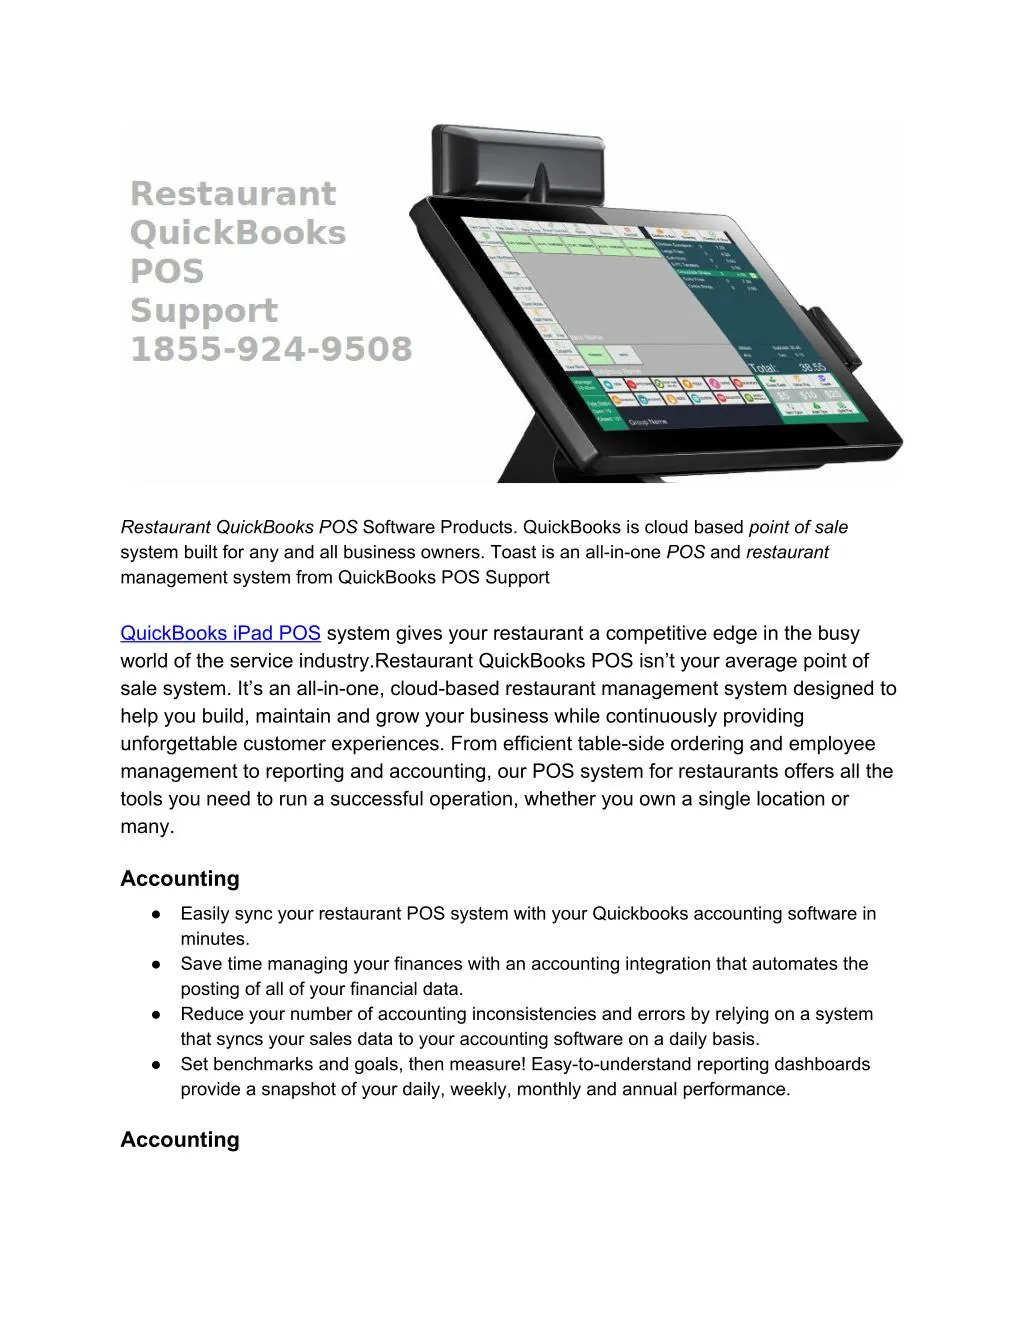 restaurant quickbooks pos software products